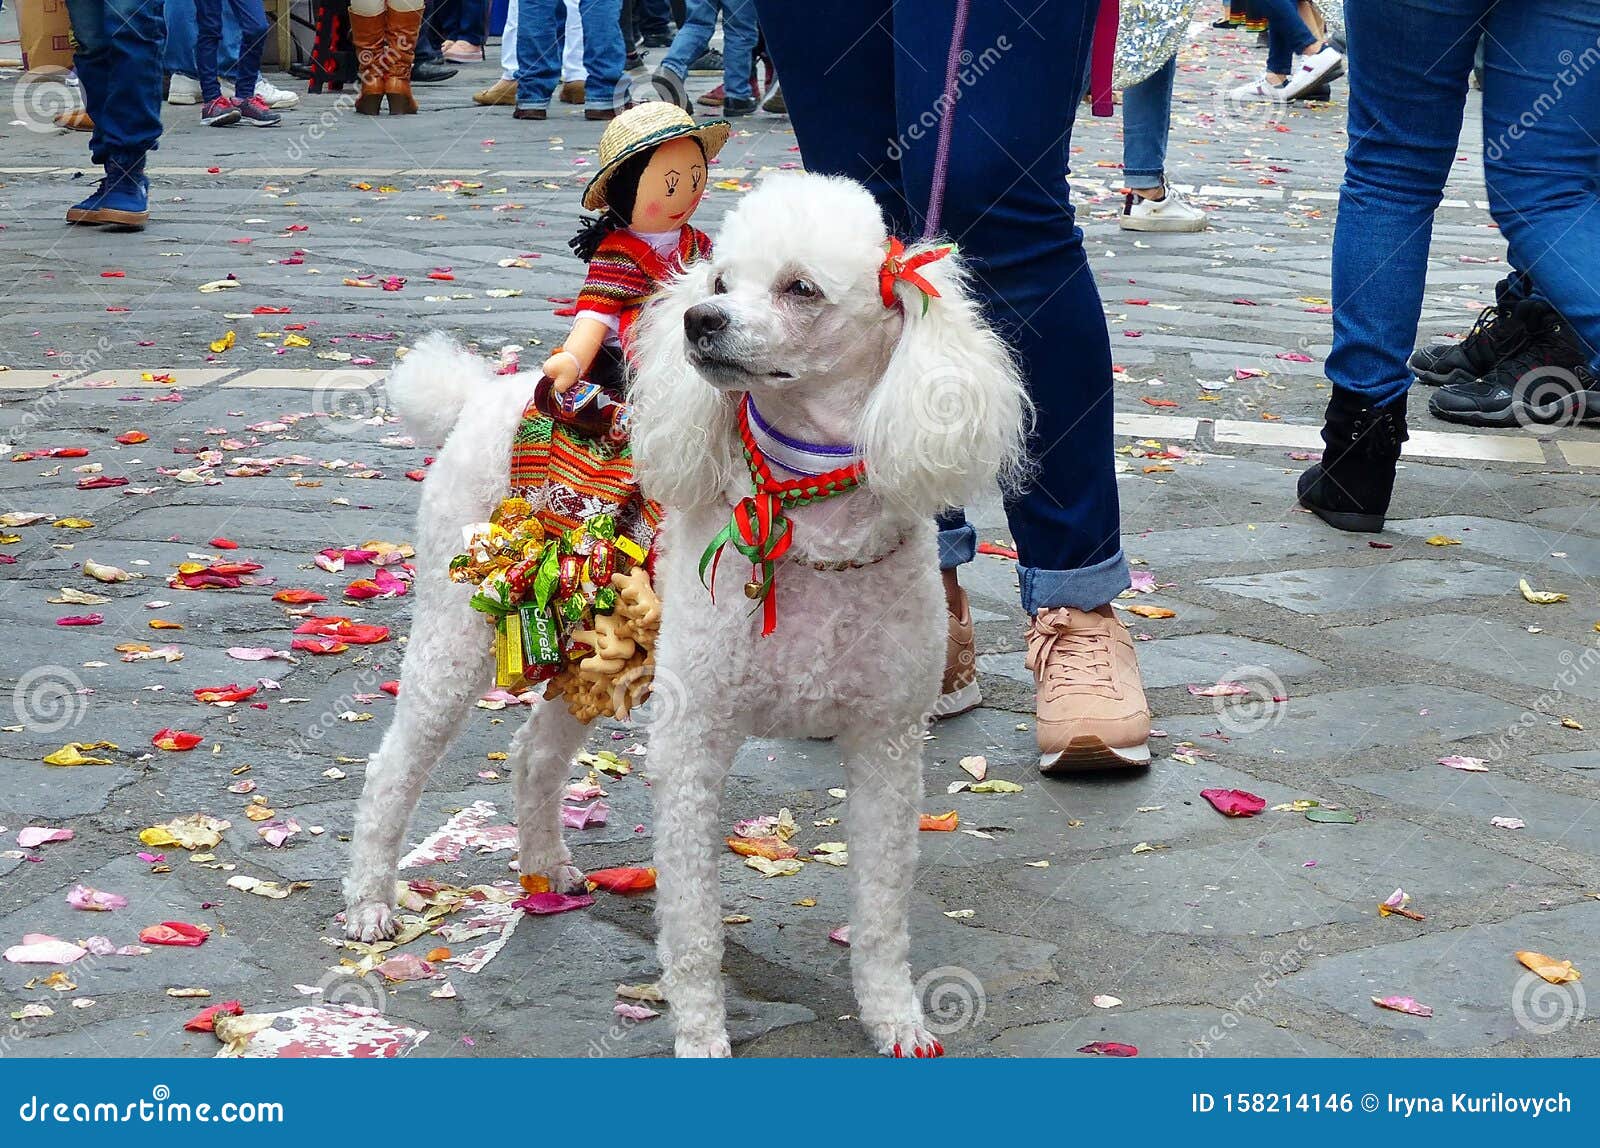 he dog is decorated as a horse with a rider. ecuador